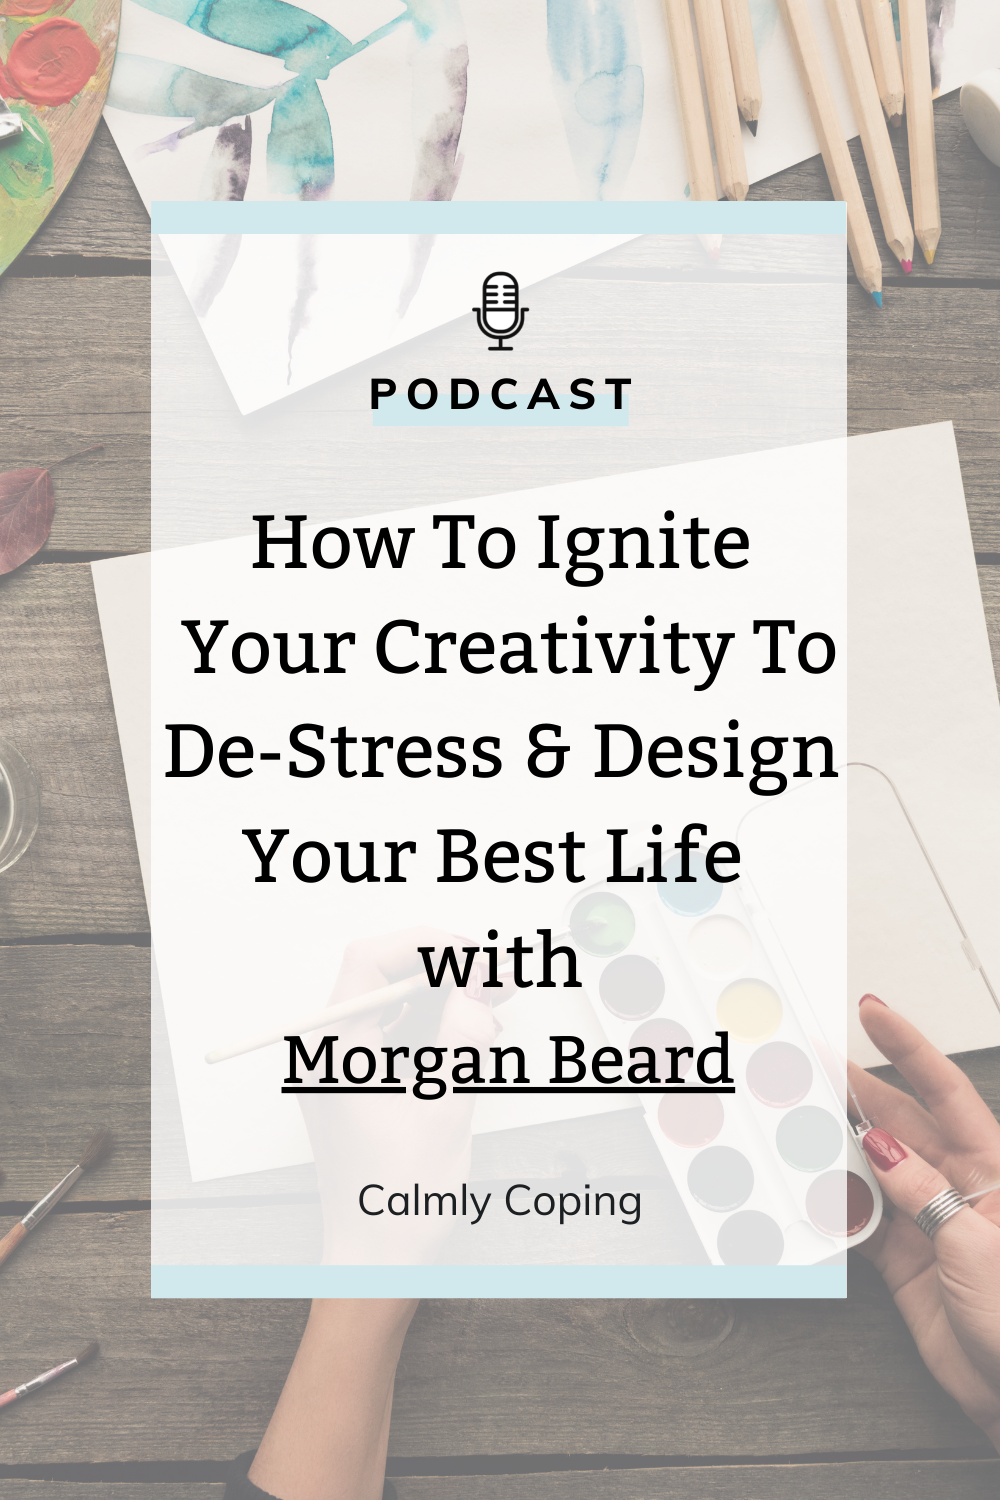 How To Ignite Your Creativity To De-Stress And Design Your Best Life with Morgan Beard